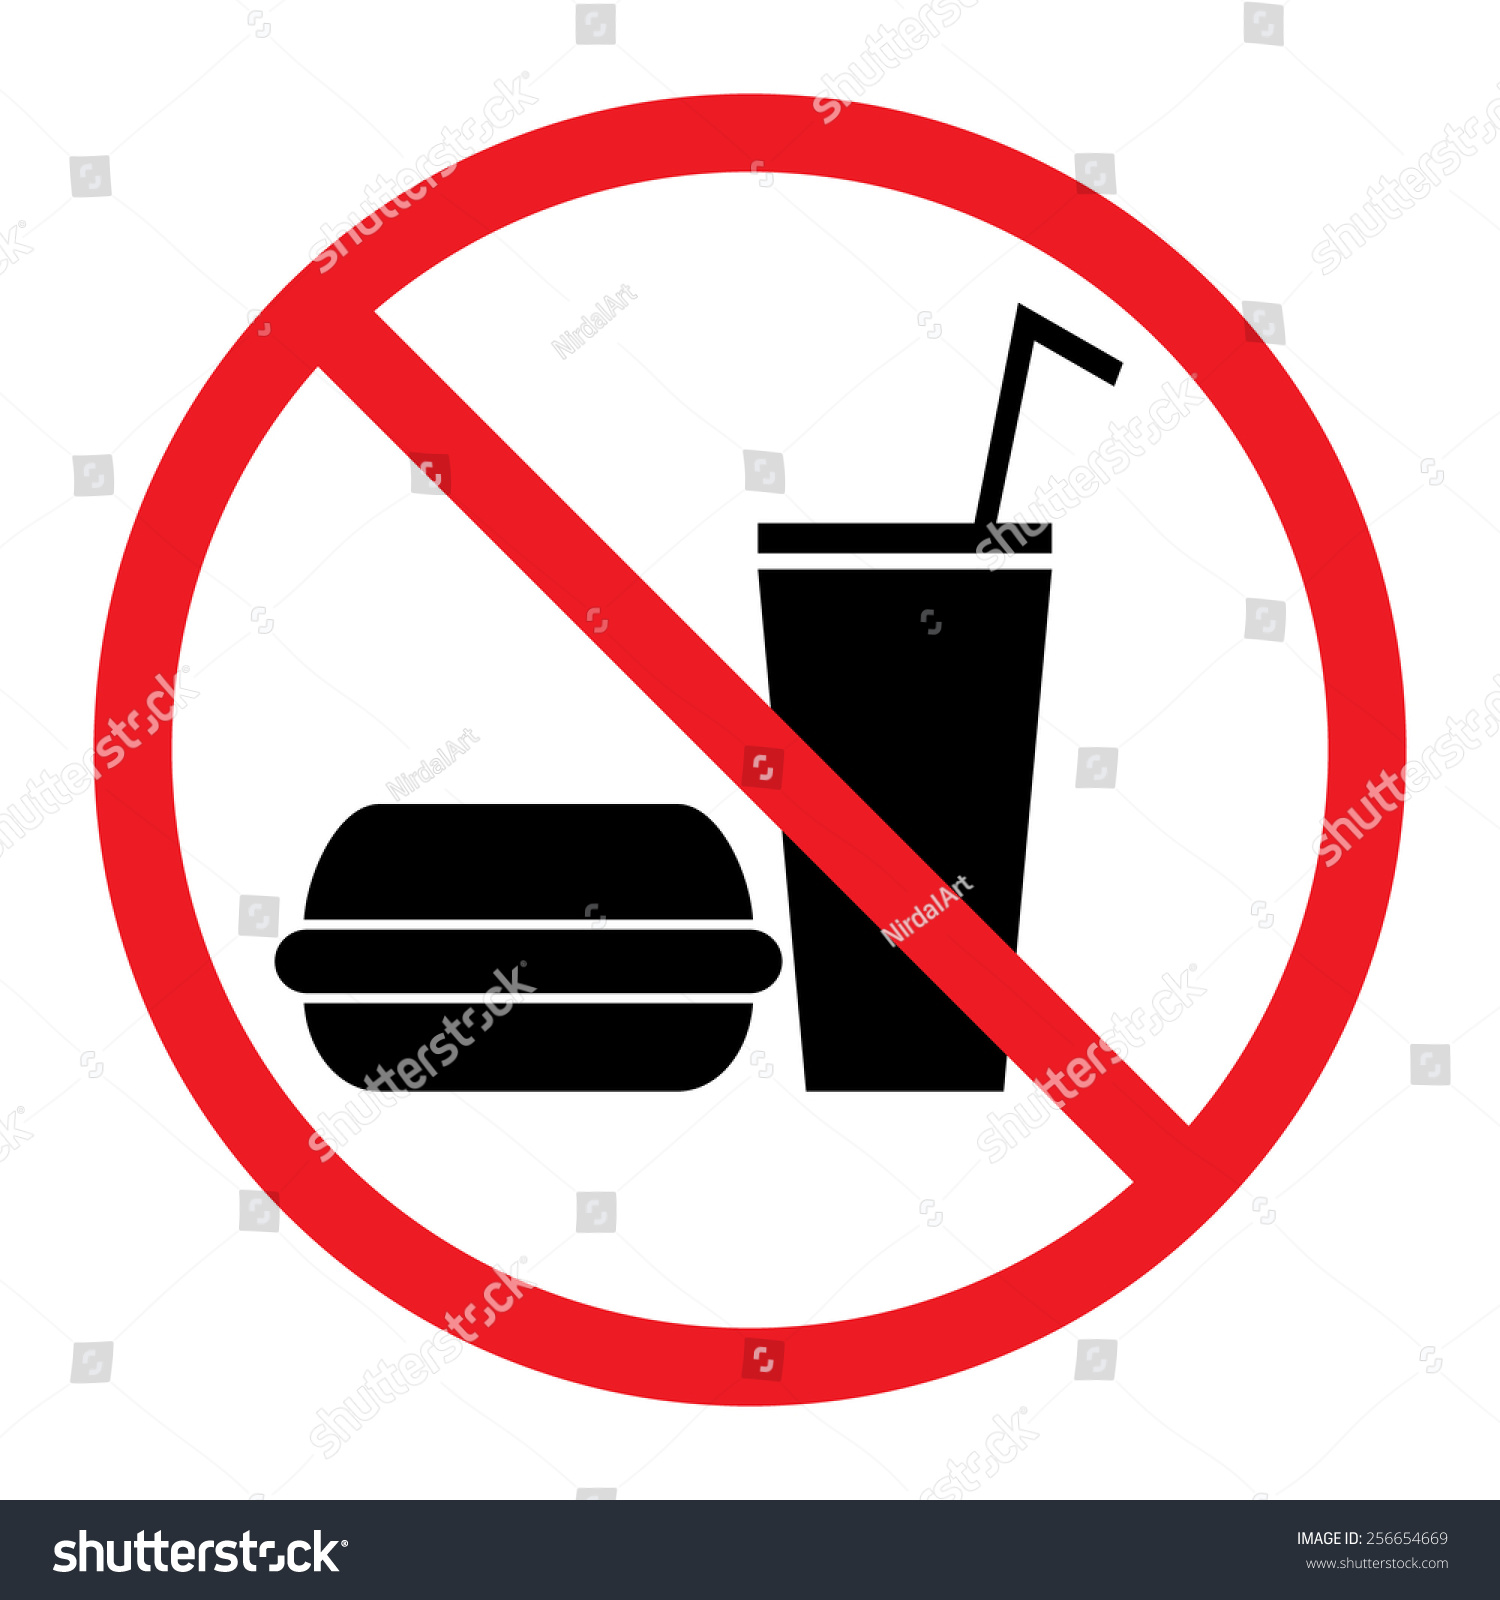 Food Drink Prohibition Sign Stock Vector (Royalty Free) 256654669 ...